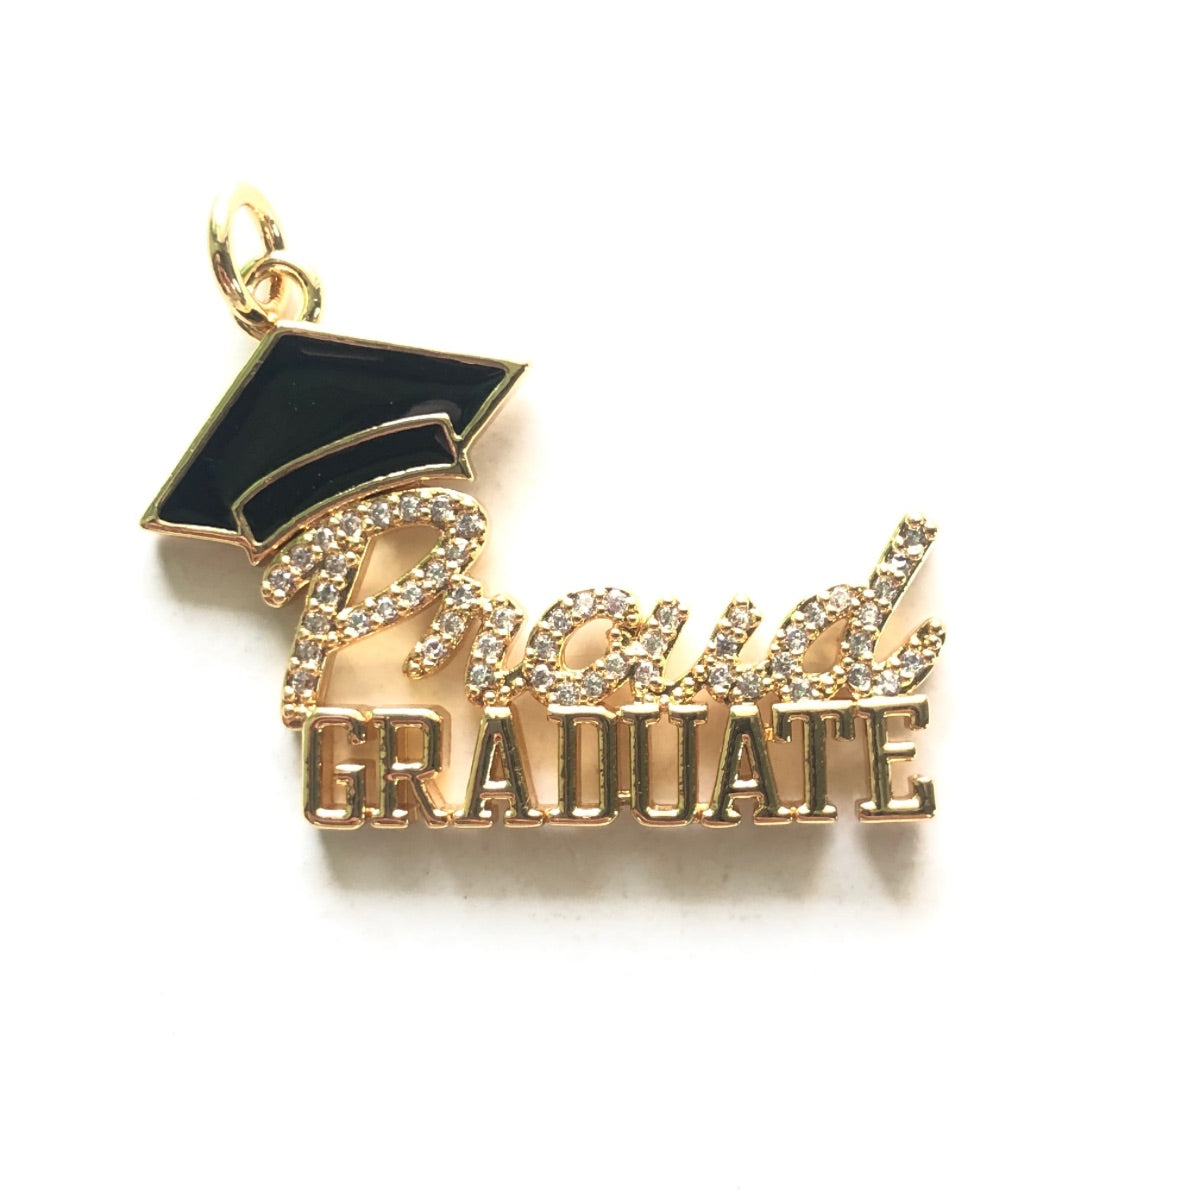 10pcs/lot 34.5*24.5mm CZ Pave Proud Graduate Word Charms for Graduation Gold CZ Paved Charms Graduation New Charms Arrivals Words & Quotes Charms Beads Beyond